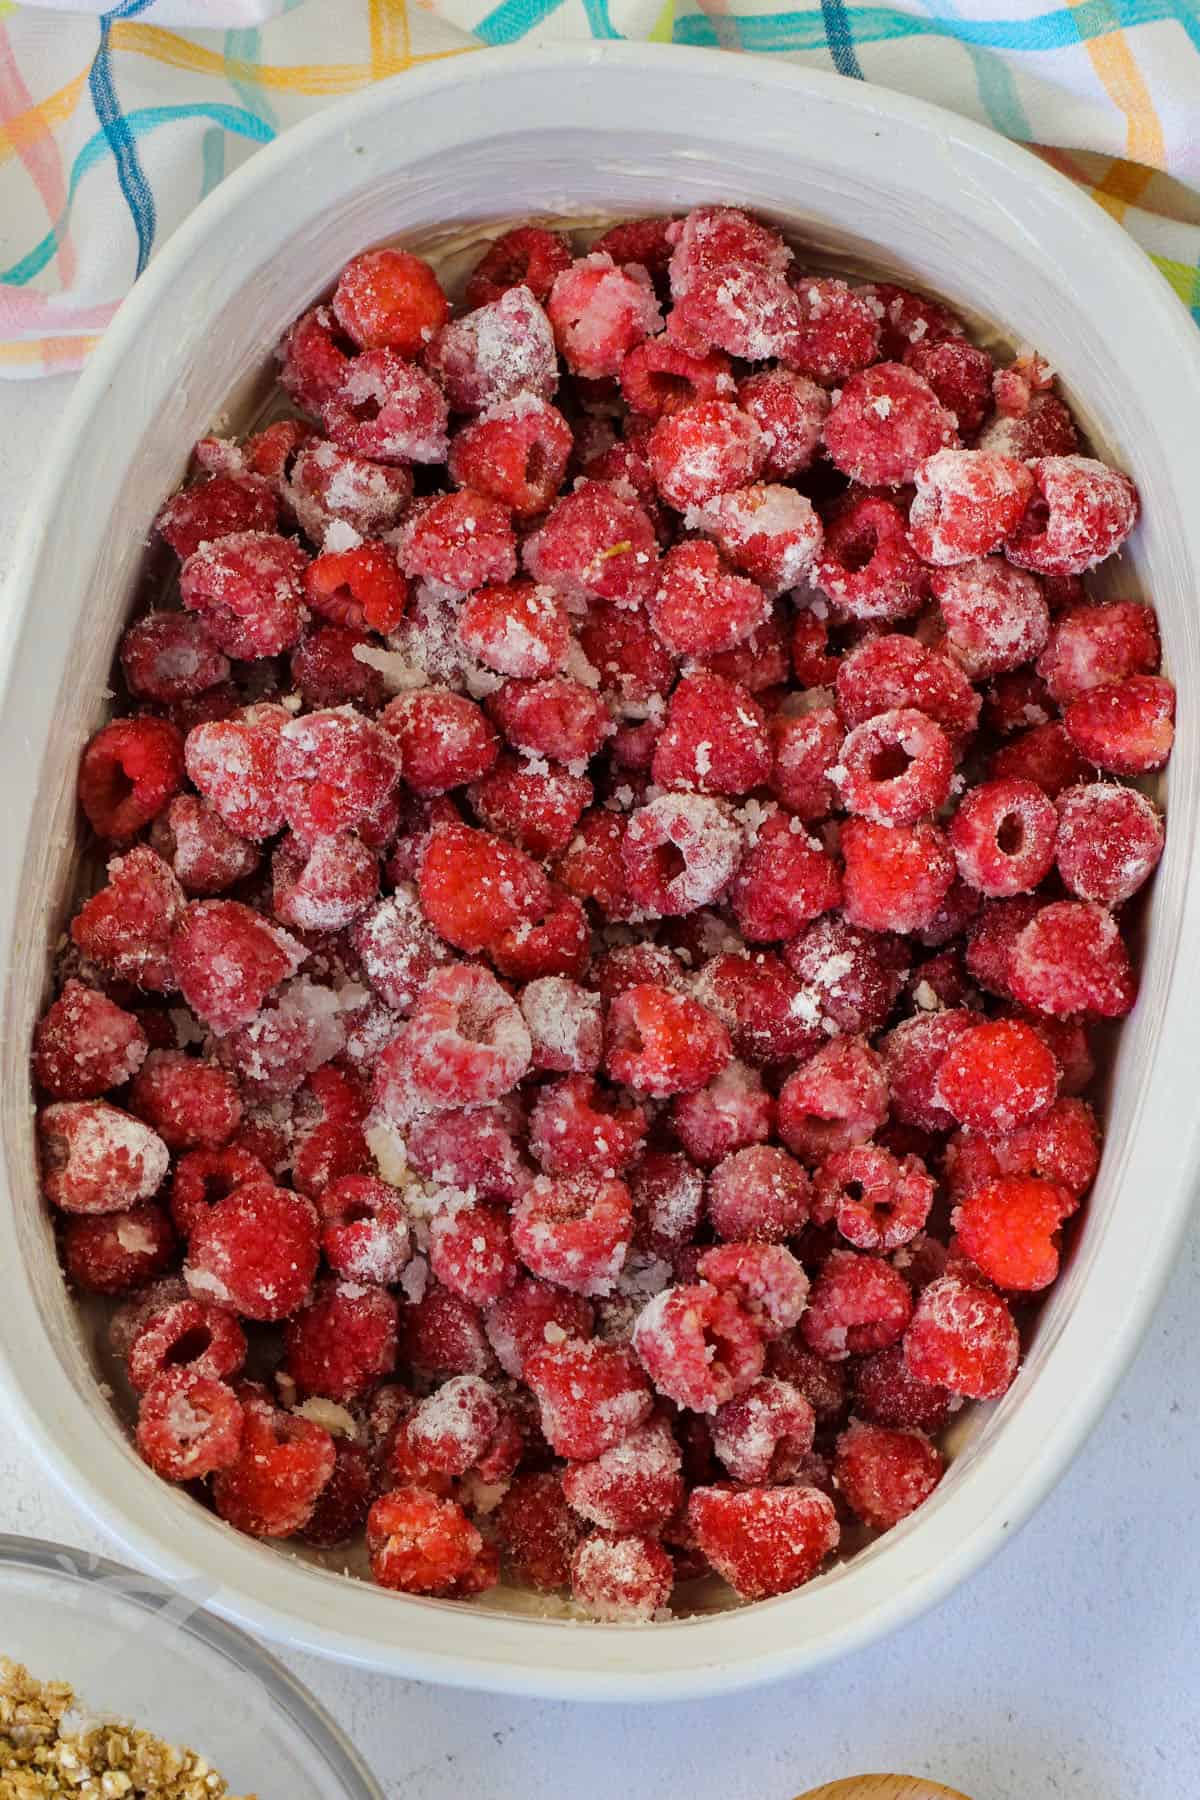 raspberries tossed with flour and sugar, in the bottom of a white baking dish, to make raspberry crisp